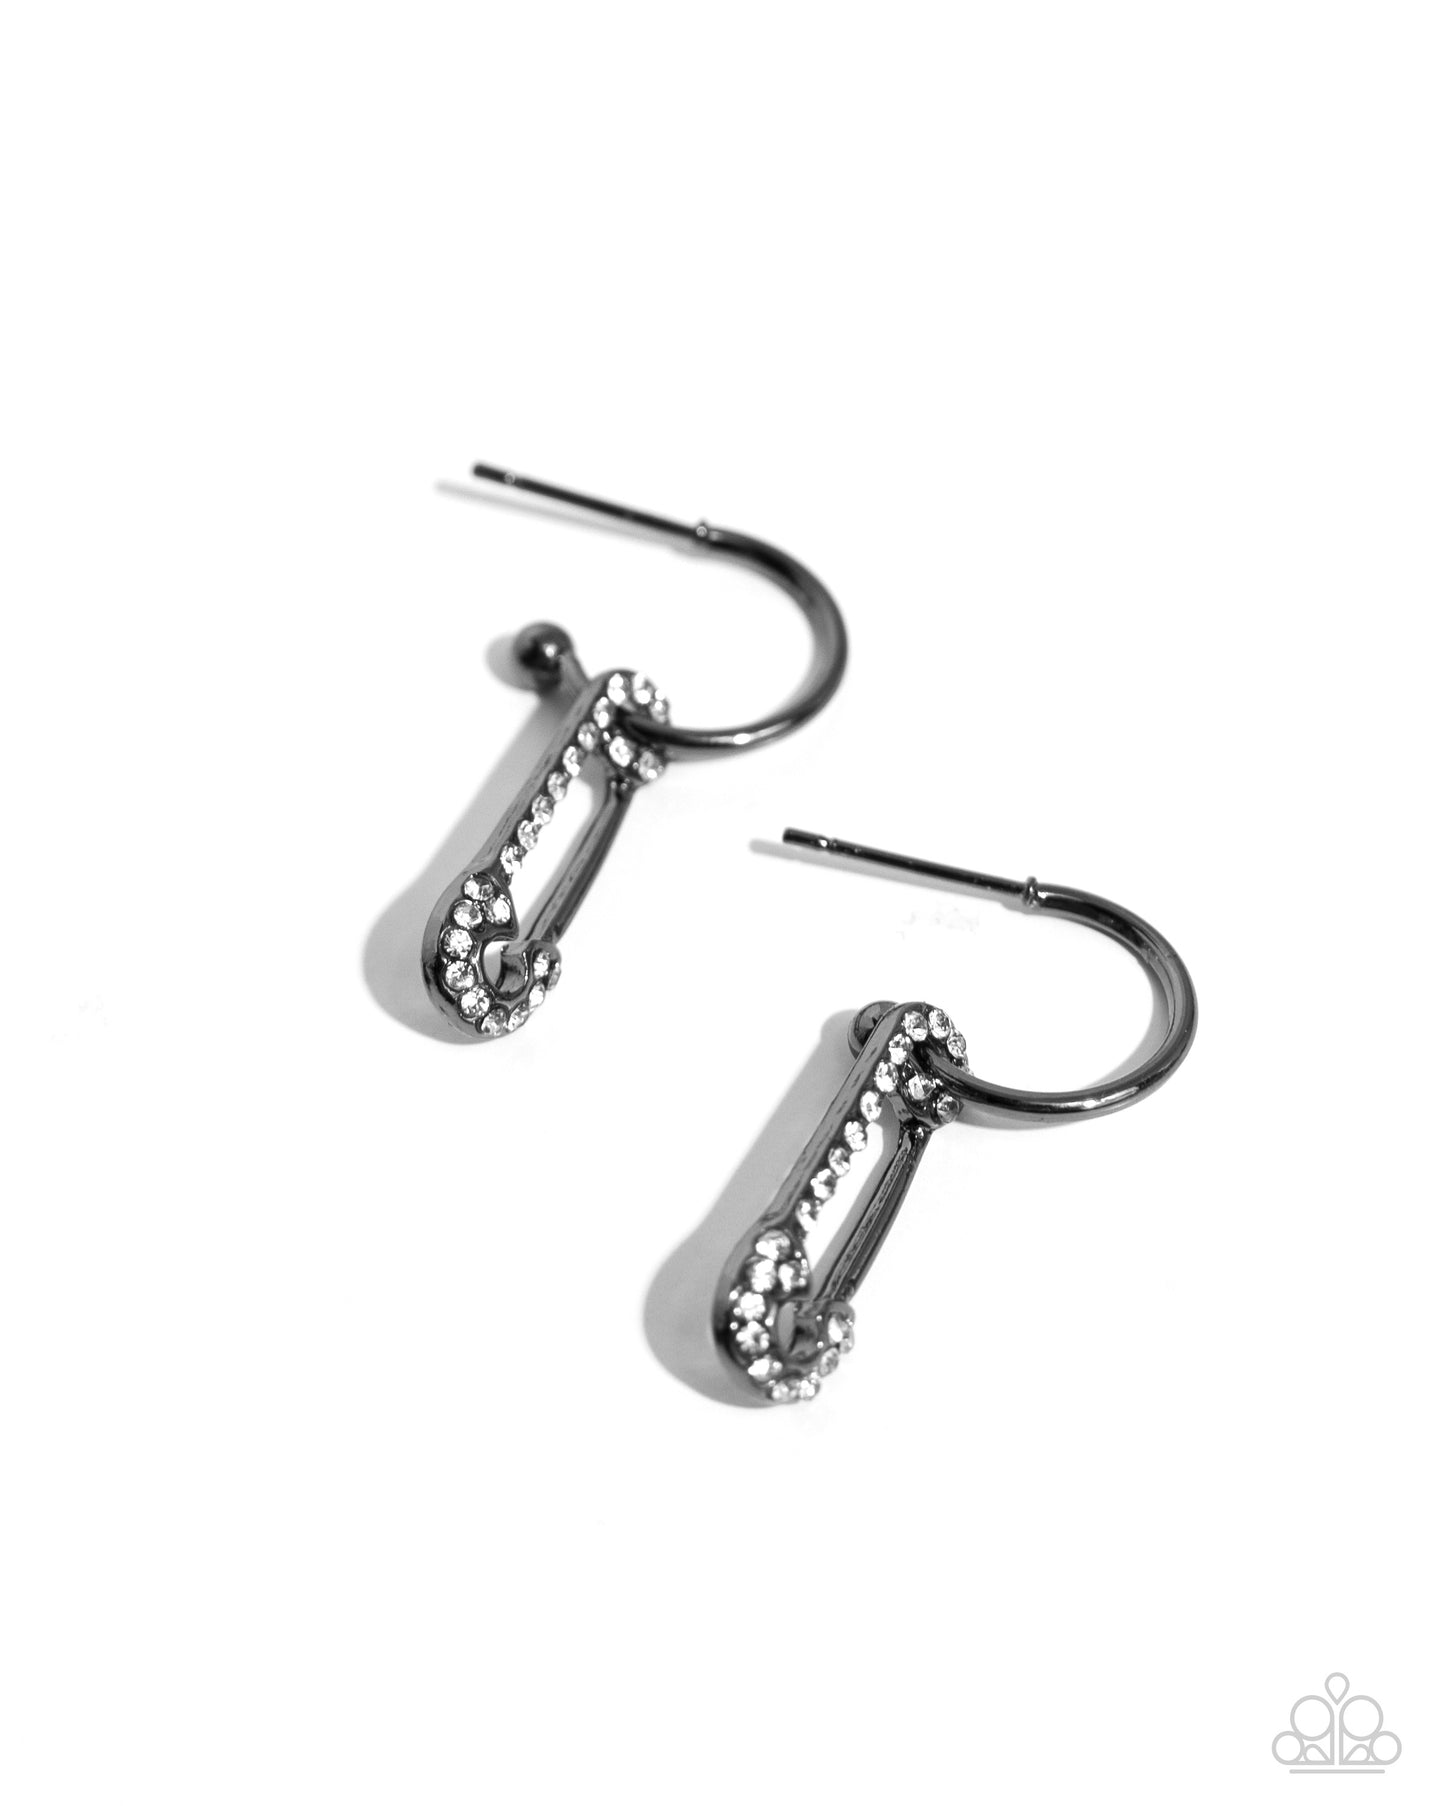 Paparazzi - Safety Pin Sentiment - Black Earrings